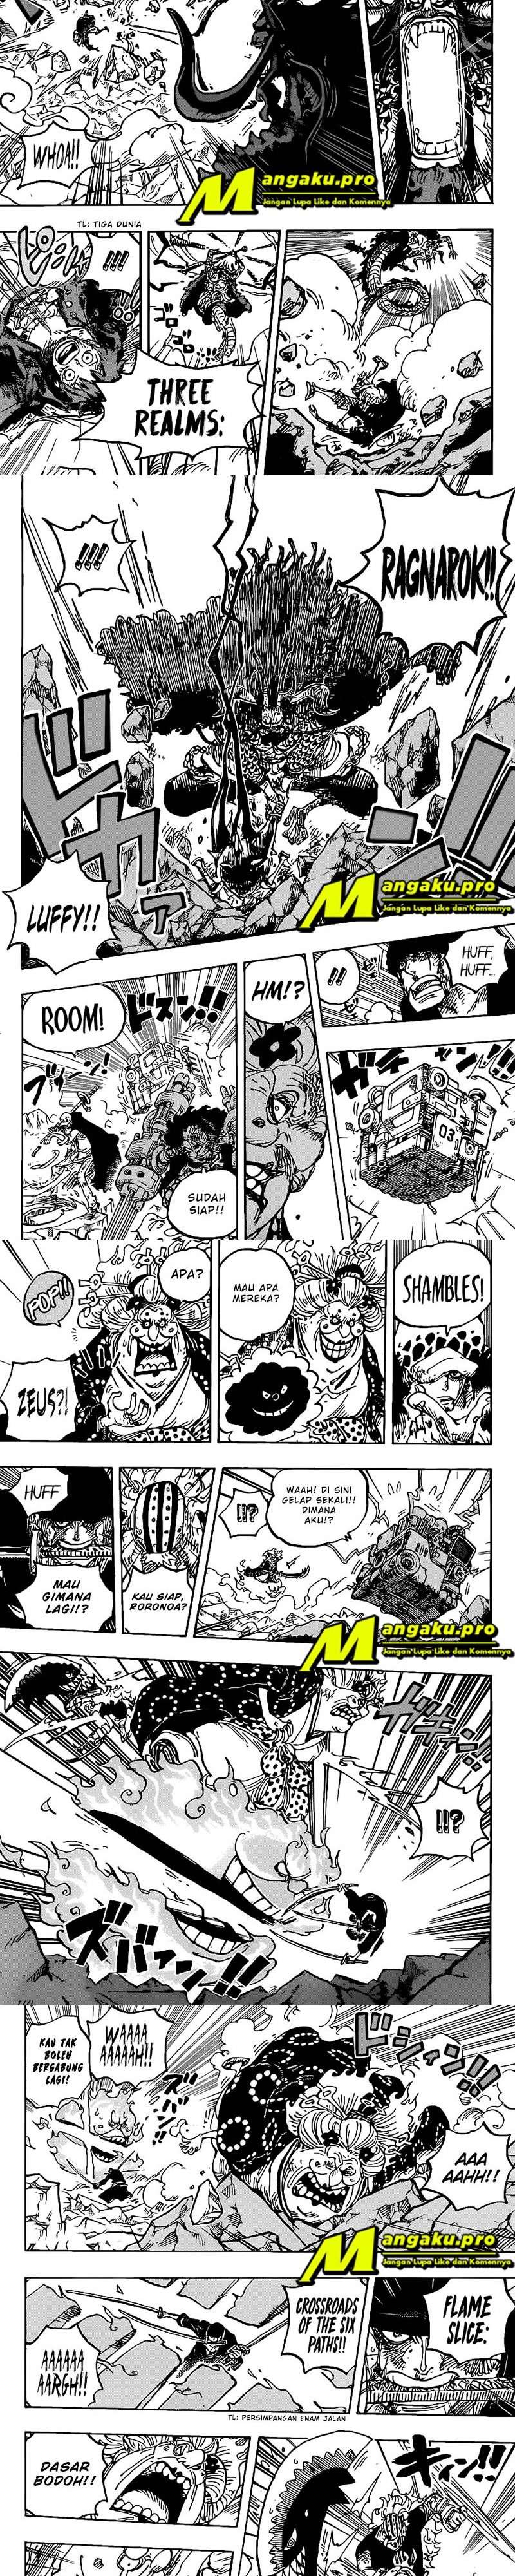 One Piece Chapter 1009 Hq - 69